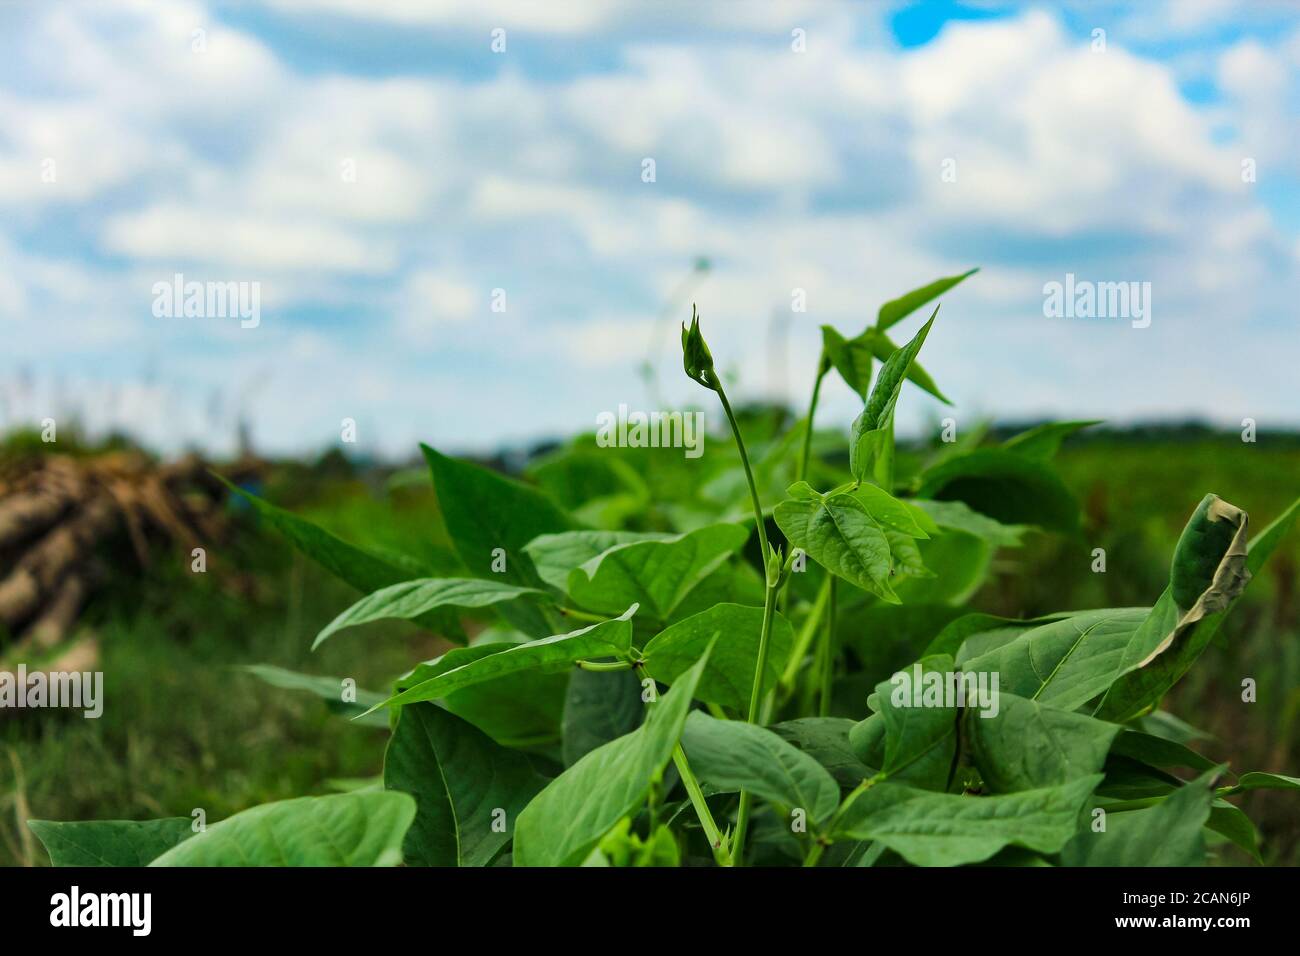 Yardlong bean plants in the field,new agriculture stock image as you need. Stock Photo